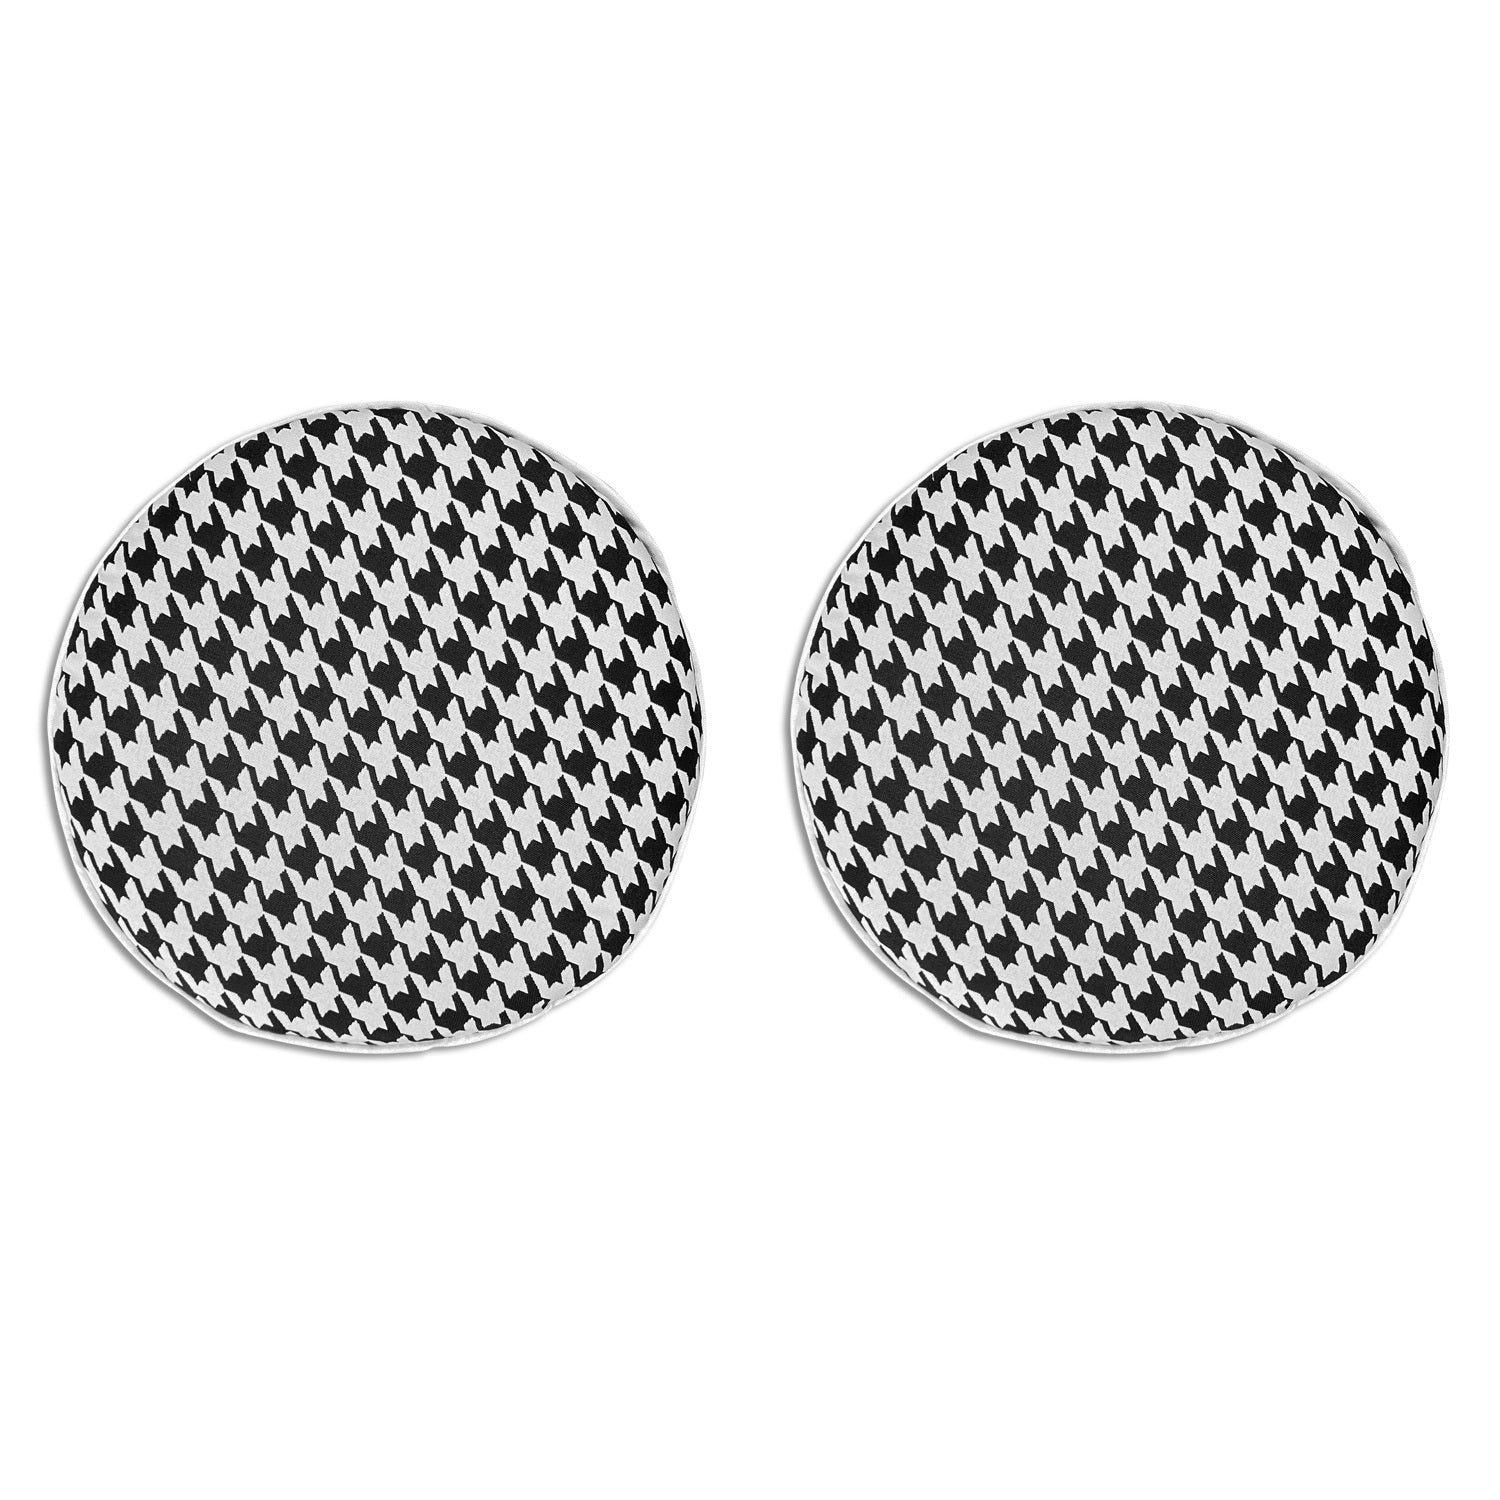 Outdoor Chair Pads Set of 2 Black Houndstooth Round Patio Chair Cushions